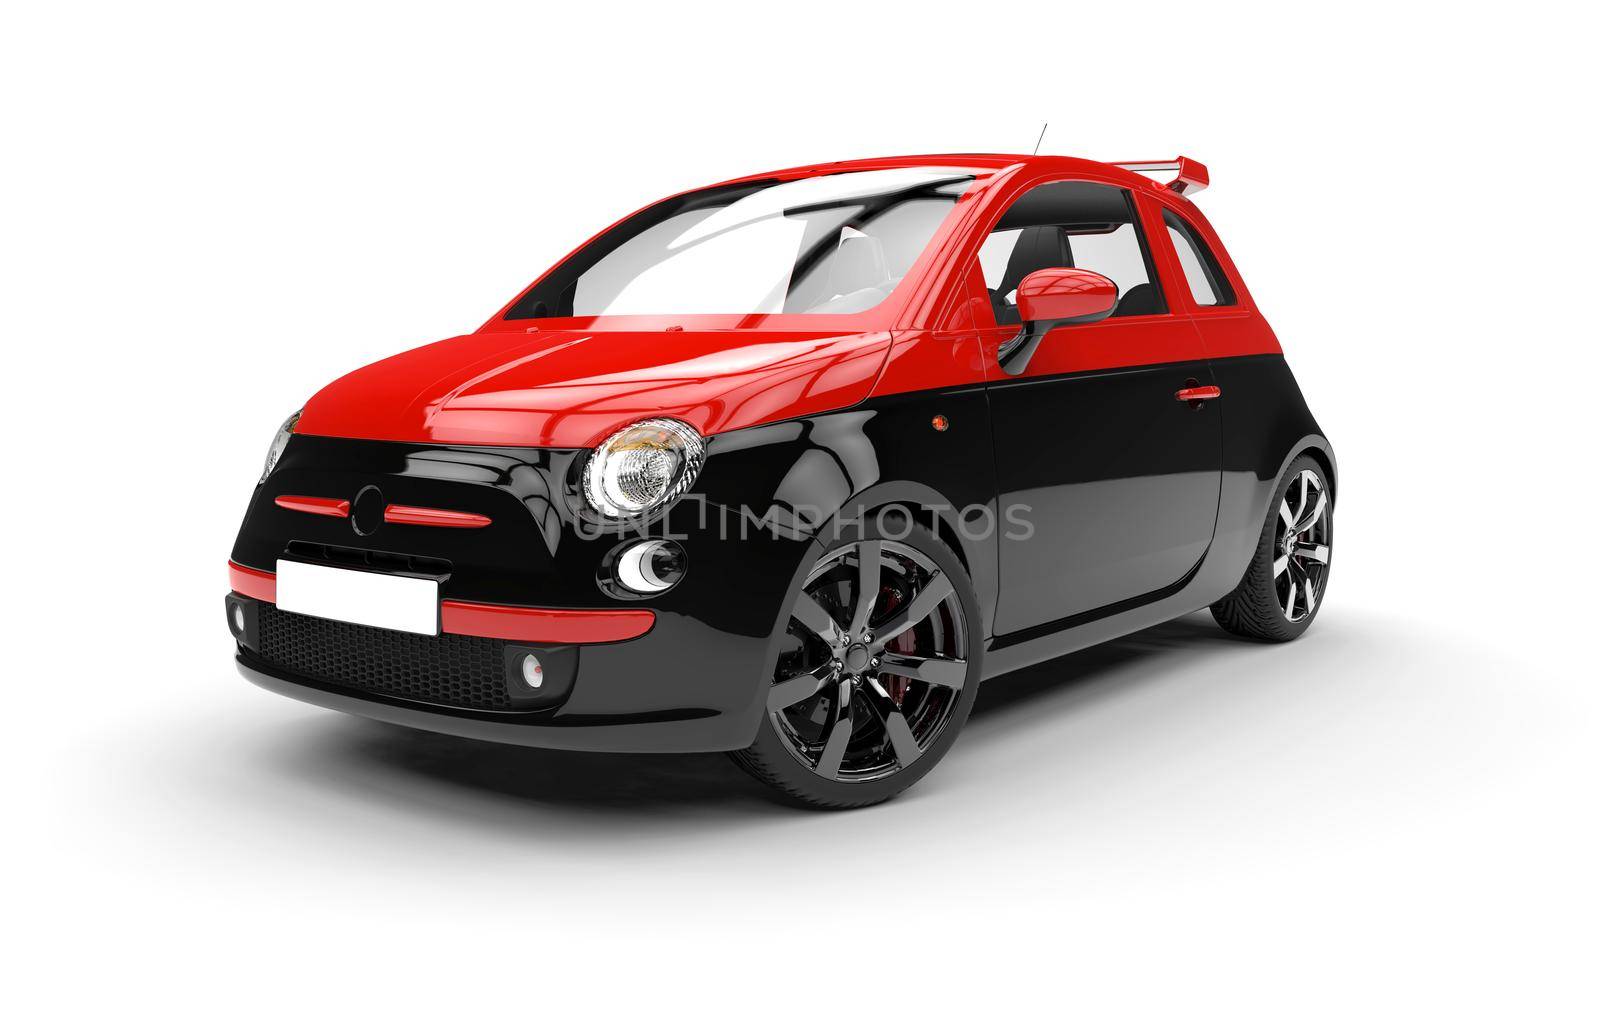 Front of a generic red and black city car isolated on a white background